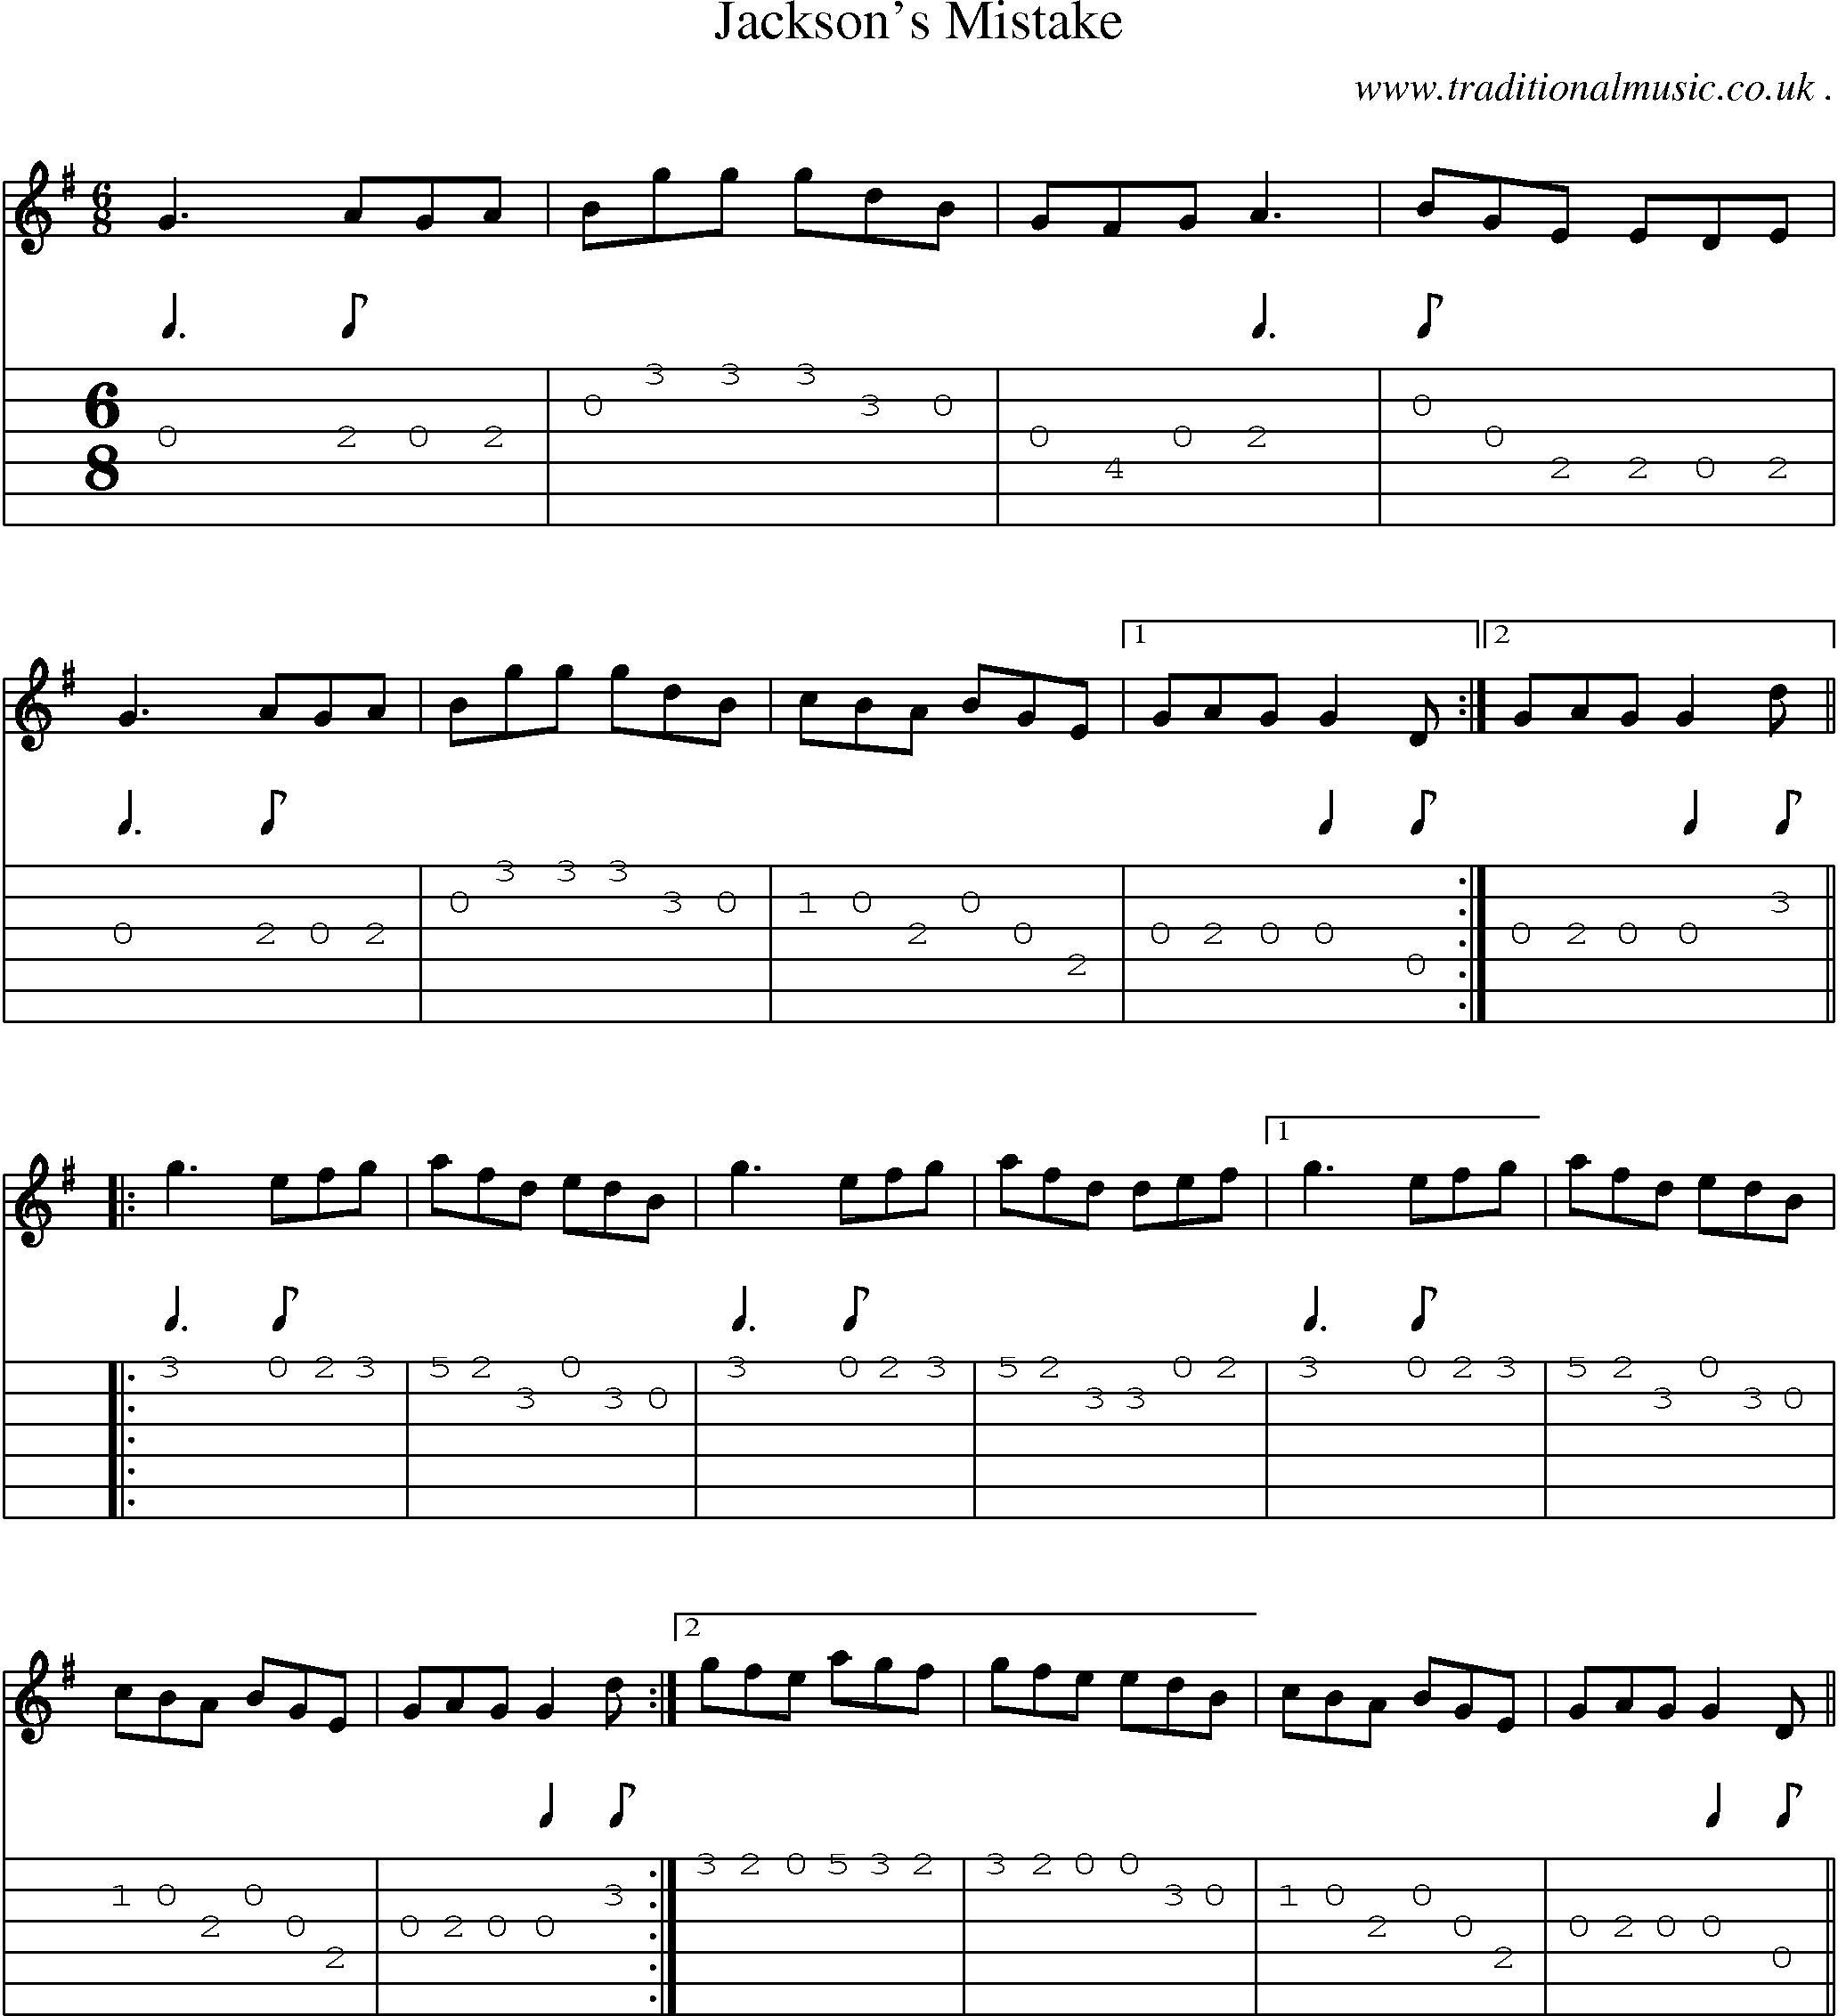 Sheet-Music and Guitar Tabs for Jacksons Mistake